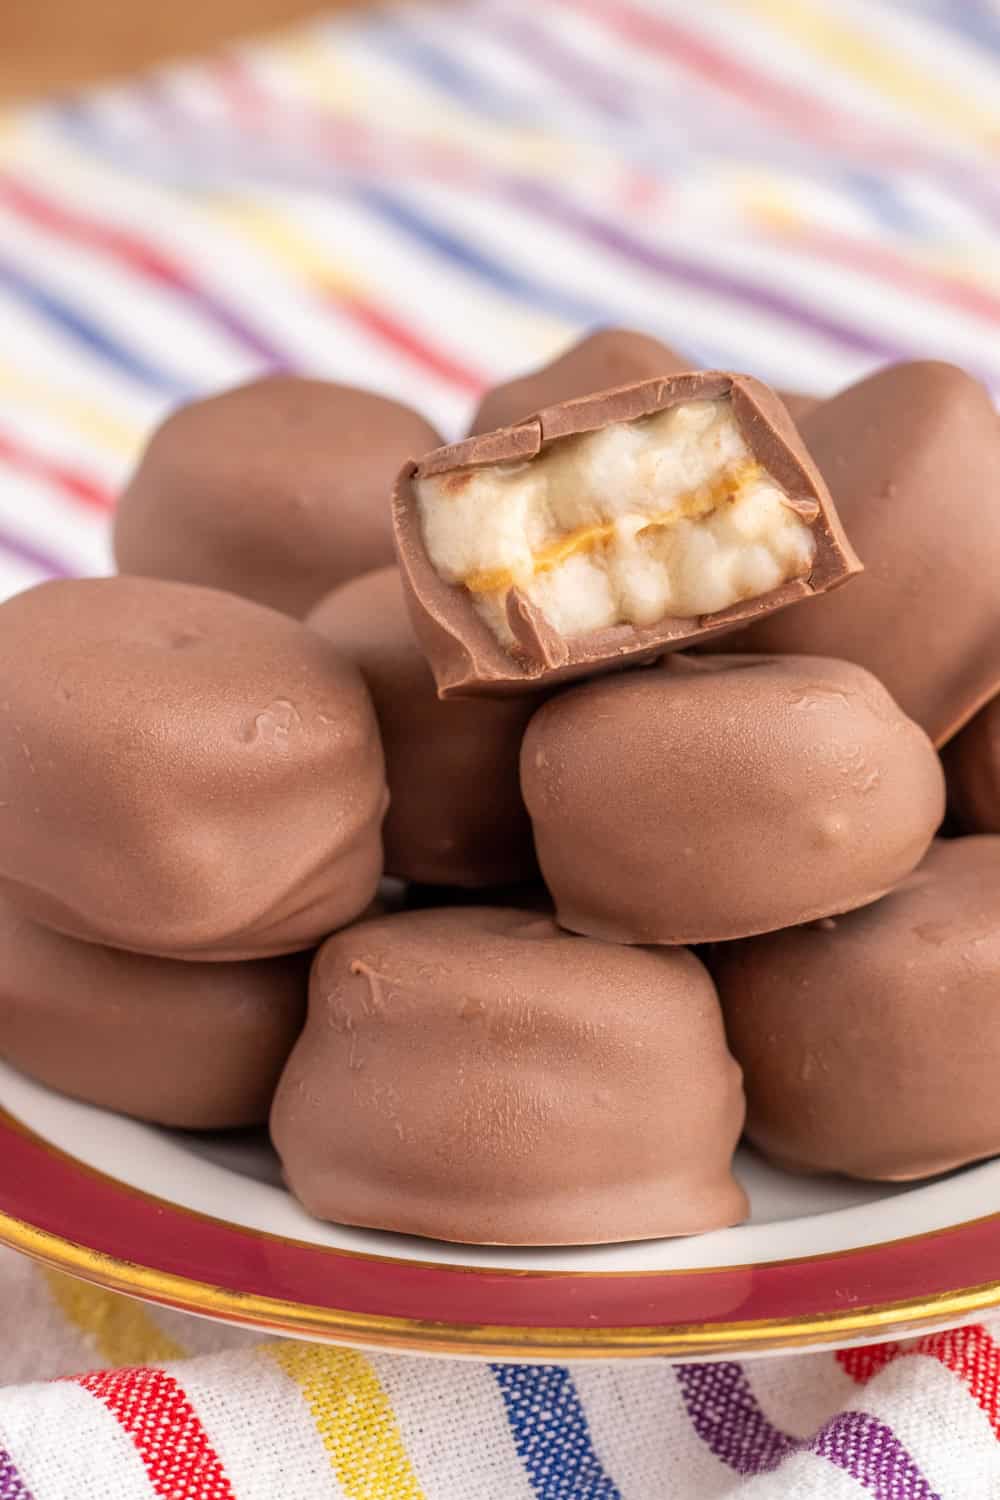 Chocolate Banana Peanut Butter Bites Are Our New Favorite Frozen Snack